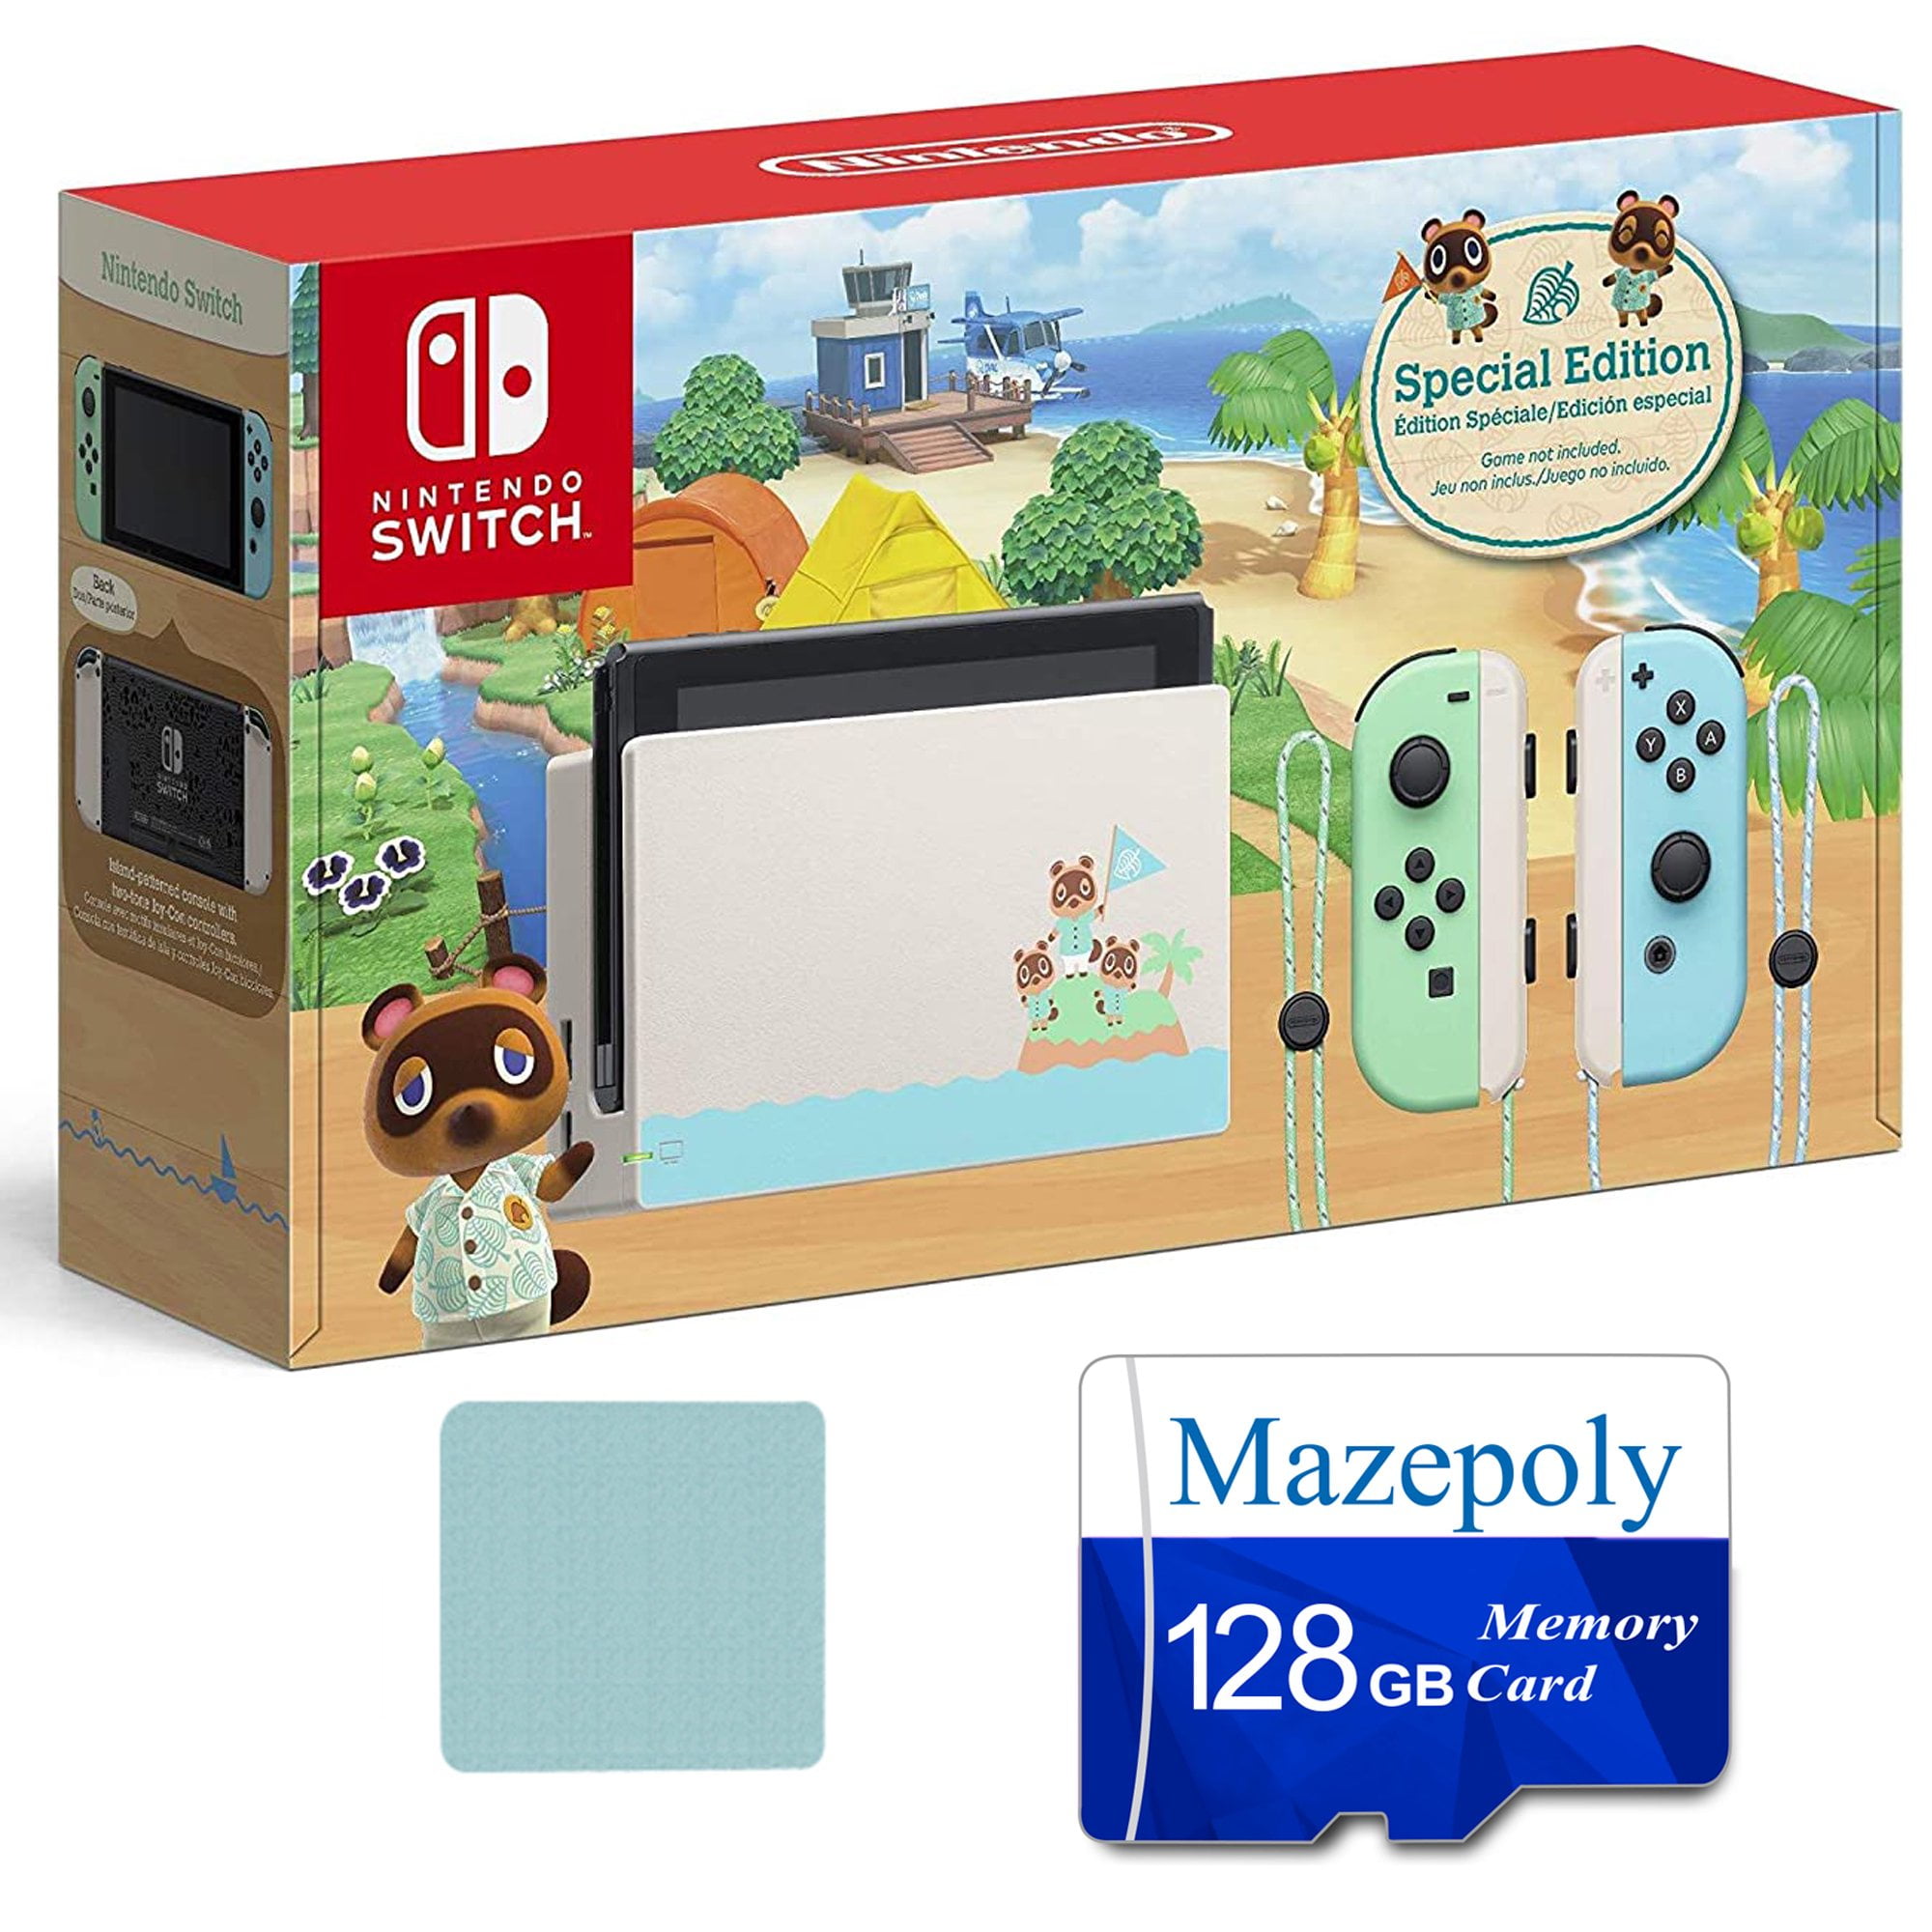 Nintendo Switch Console, Animal Crossing: New Horizons Edition with  Mazepoly Accessories(Not Including ANIMAL CROSSING Game)